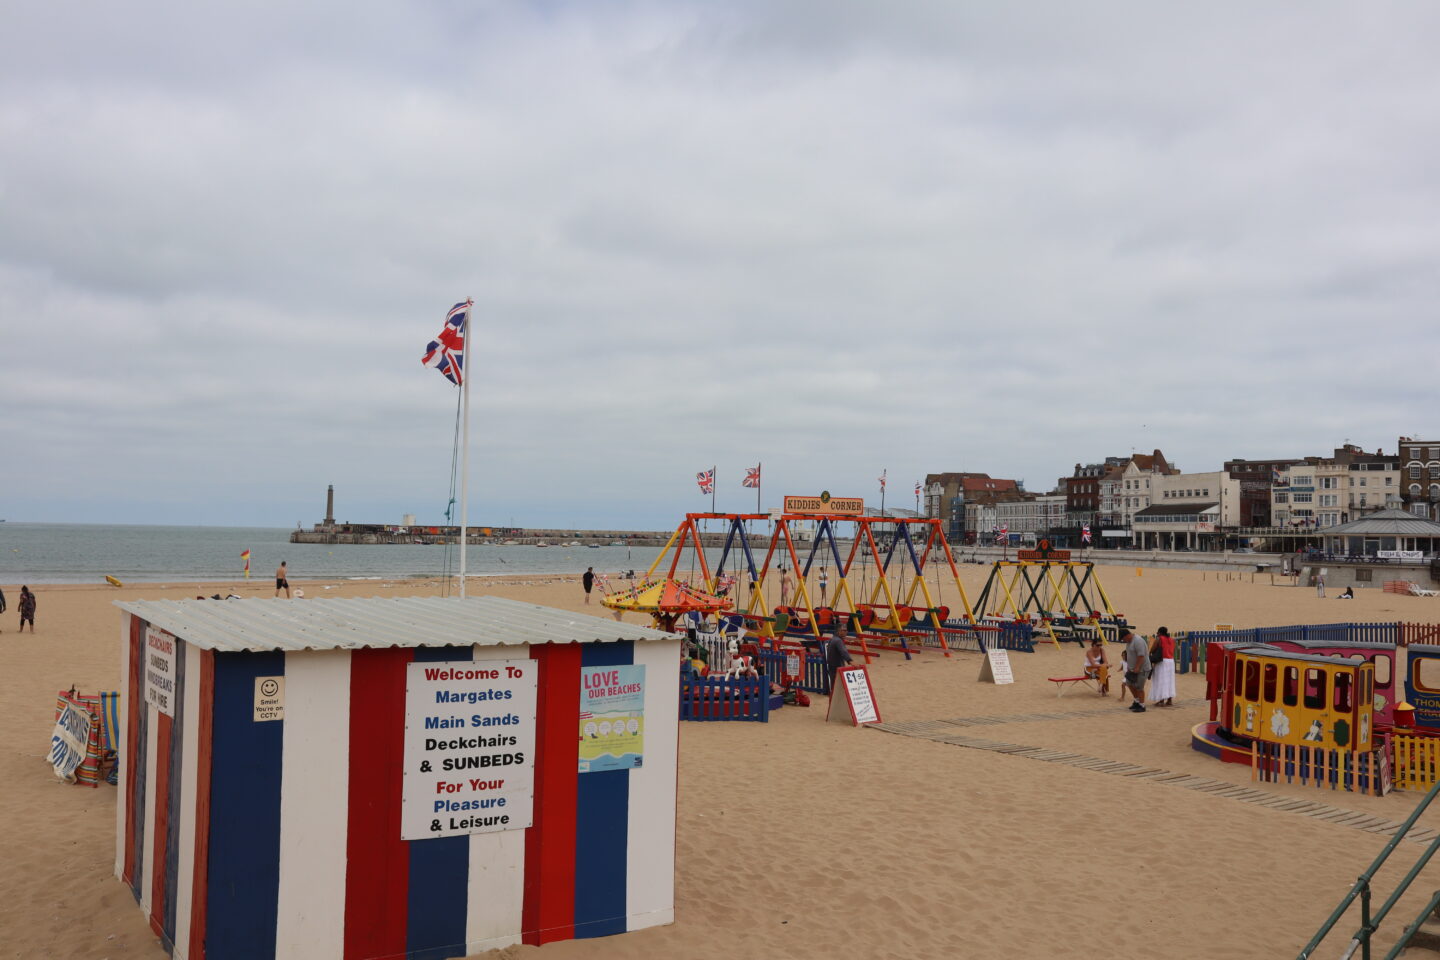 London in Winter, margate beach with grey sky